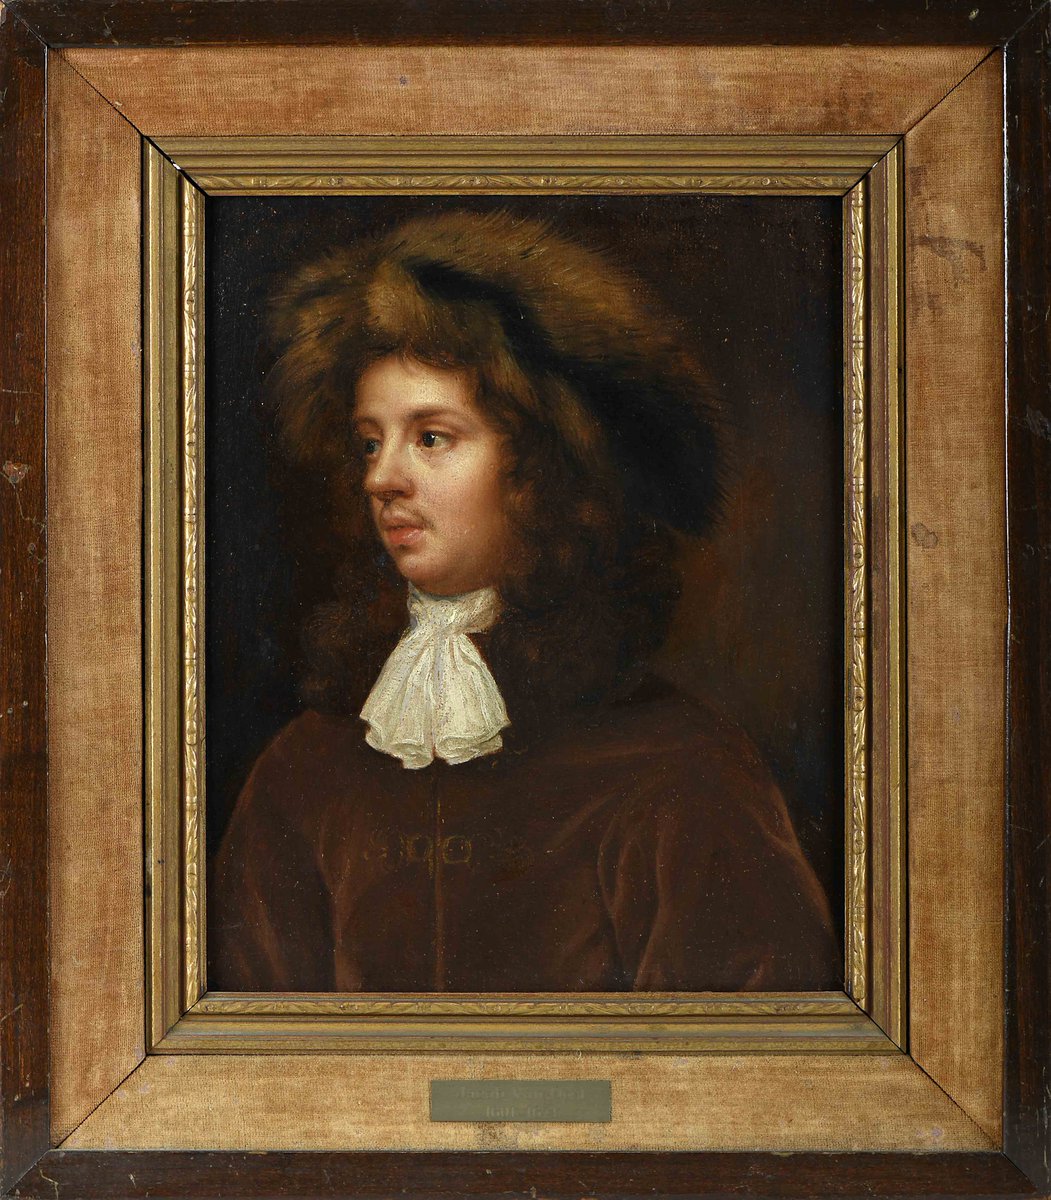 Lovely #MaryBeale #portrait of her husband Charles just made €37,000 hammer in #lisbon just now. Mis catalogued as #17thcentury #flemish. A great buy for someone...not me...booo! #oldmasters #sleeper #artnews #fineart #britishart #femaleartist #fineart #art